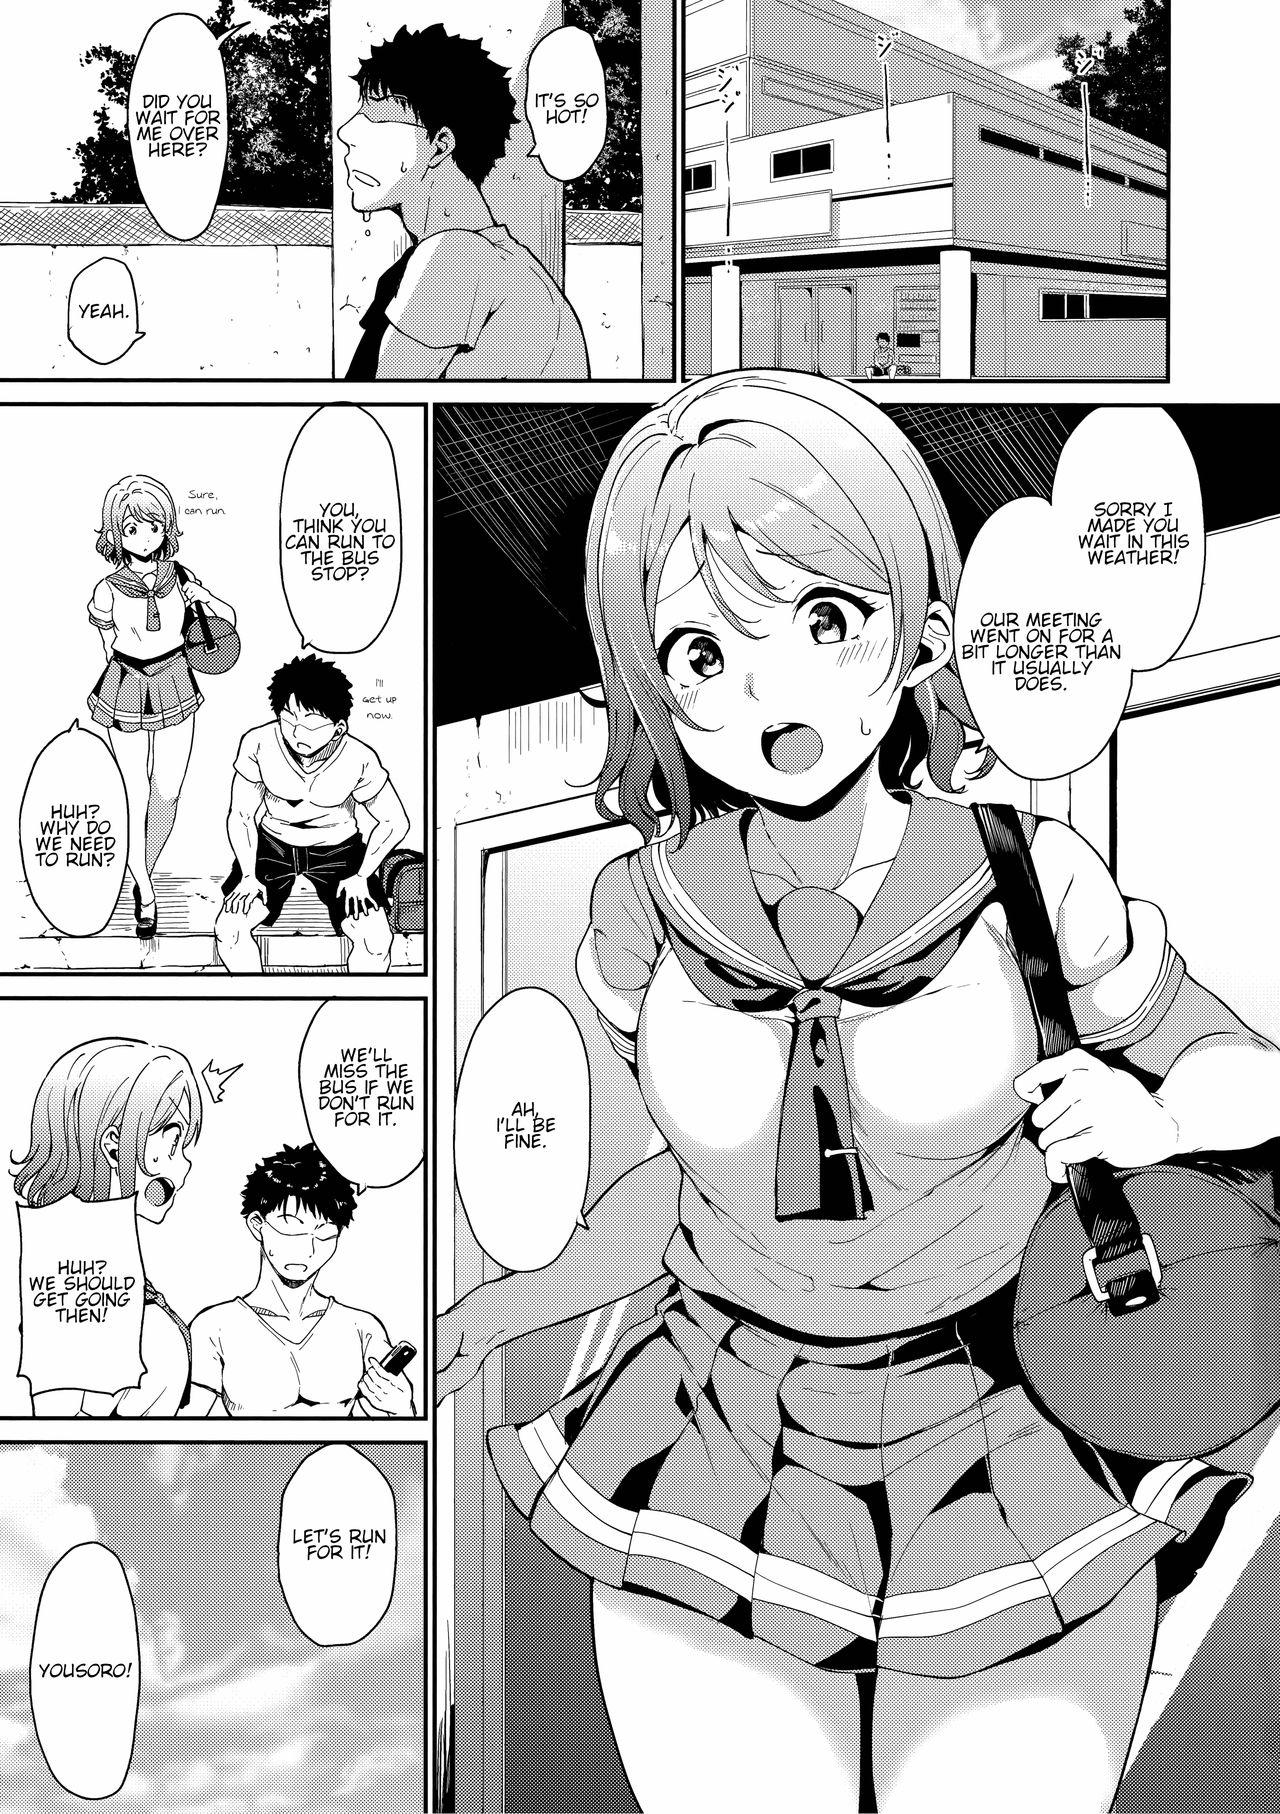 Booty Watanabe no Kyuujitsu | You's Day Off - Love live sunshine Prostitute - Page 2